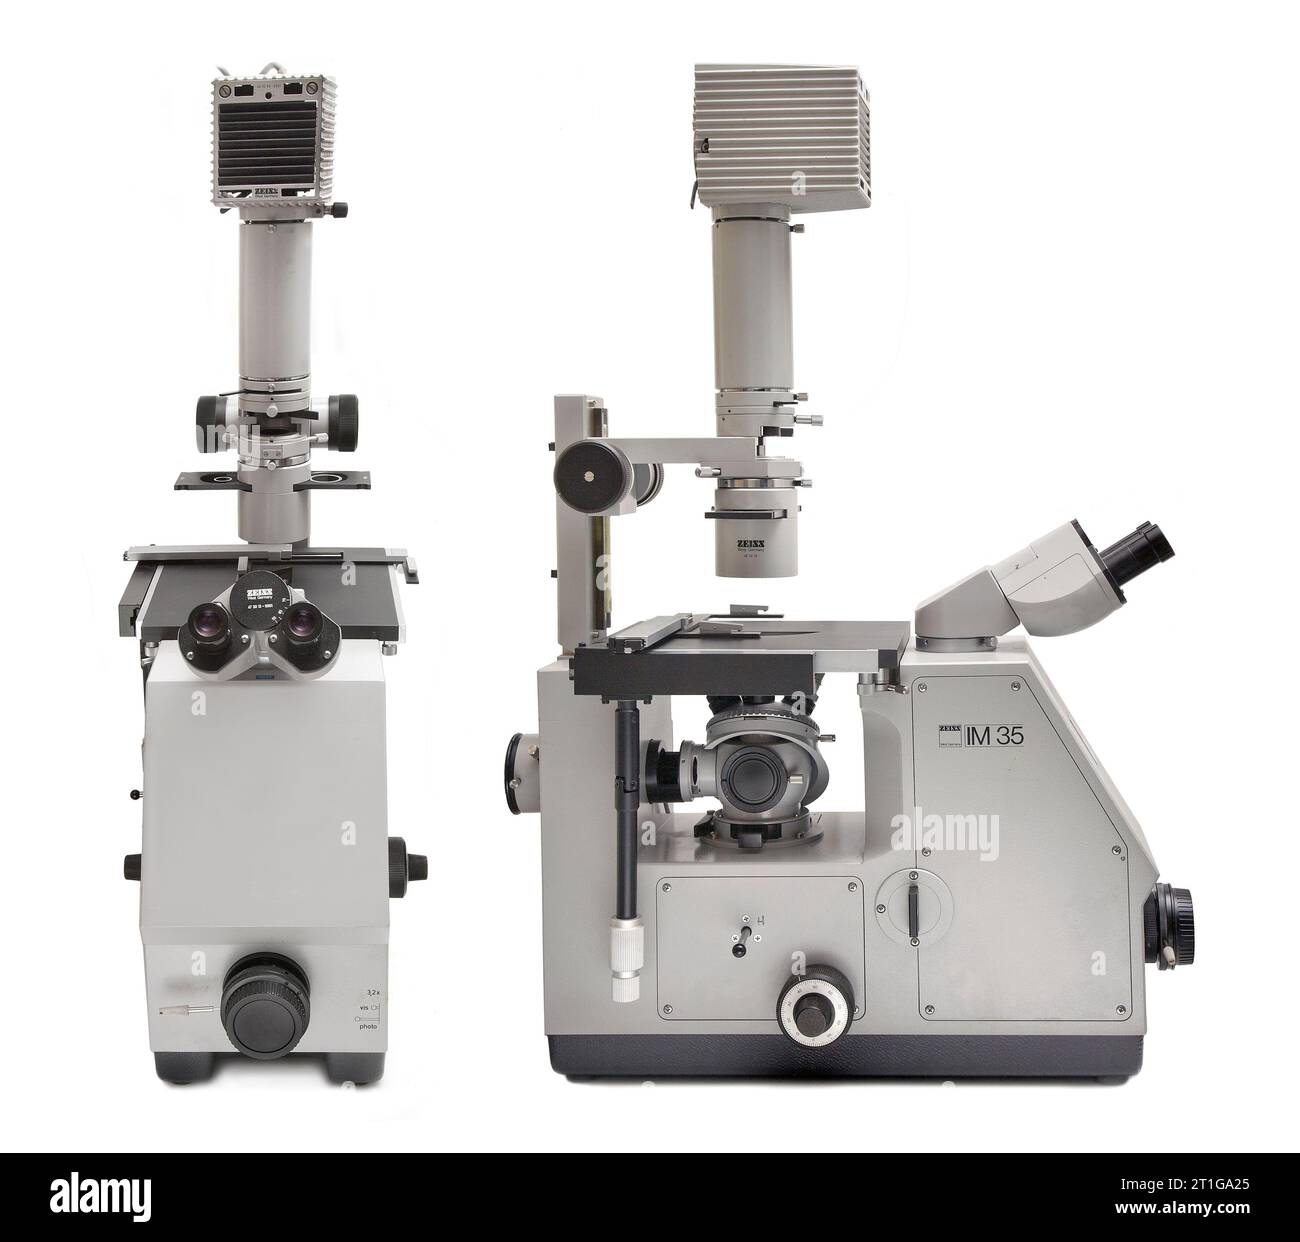 Zeiss IM35 inverted phase contrast microscope Stock Photo